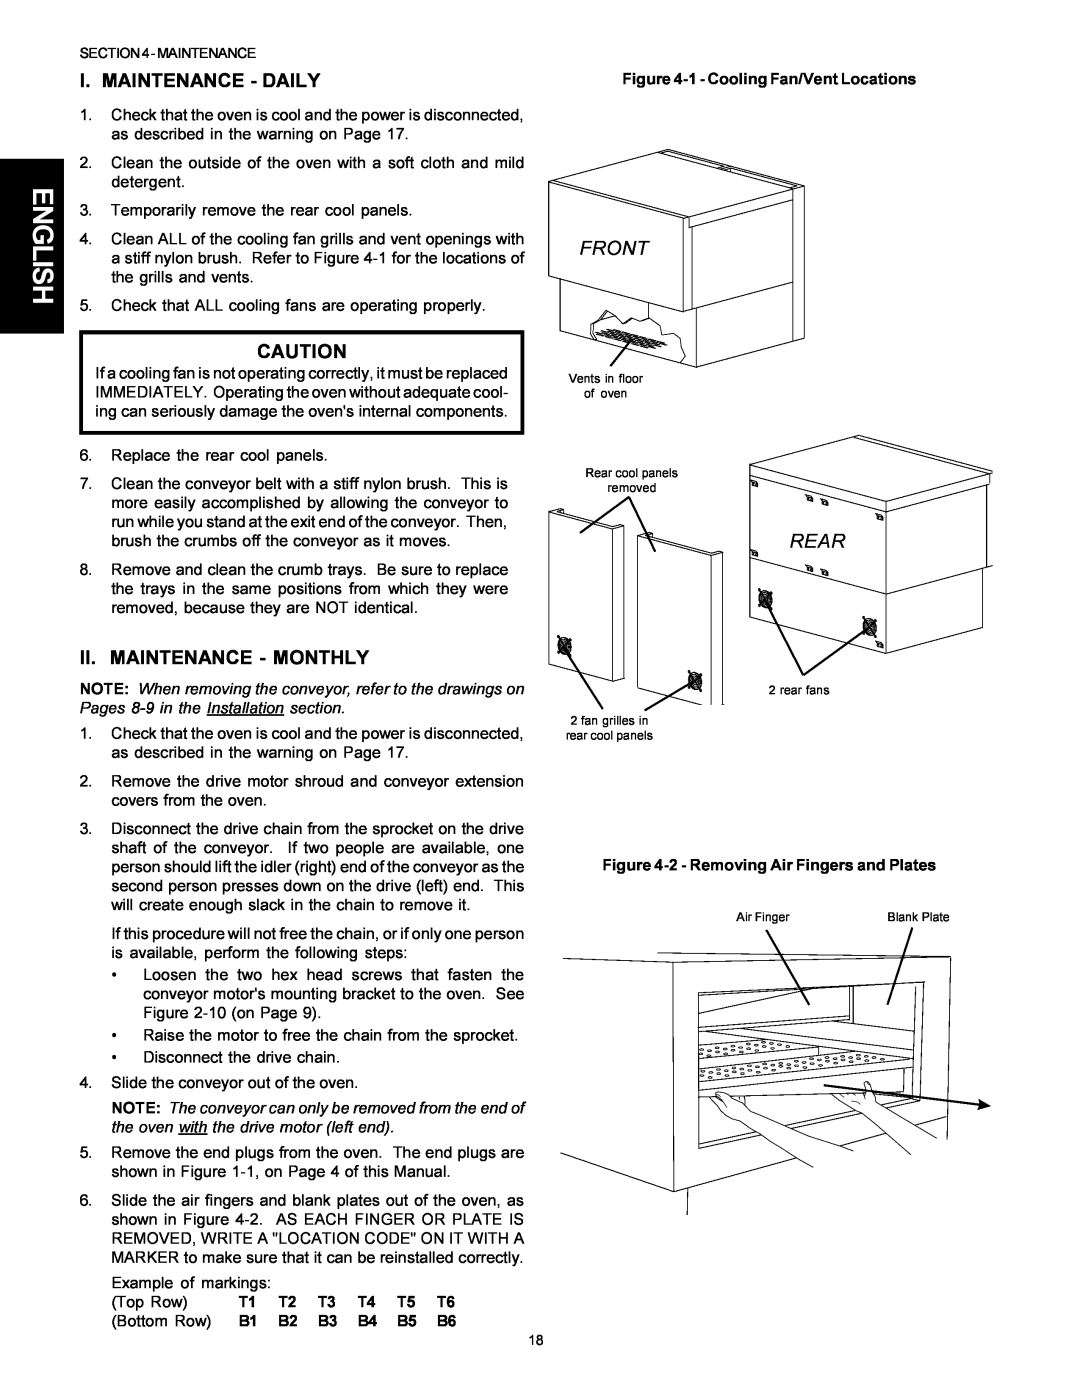 Middleby Marshall PS314SBI installation manual English, I. Maintenance - Daily, Ii. Maintenance - Monthly, Front, Rear 